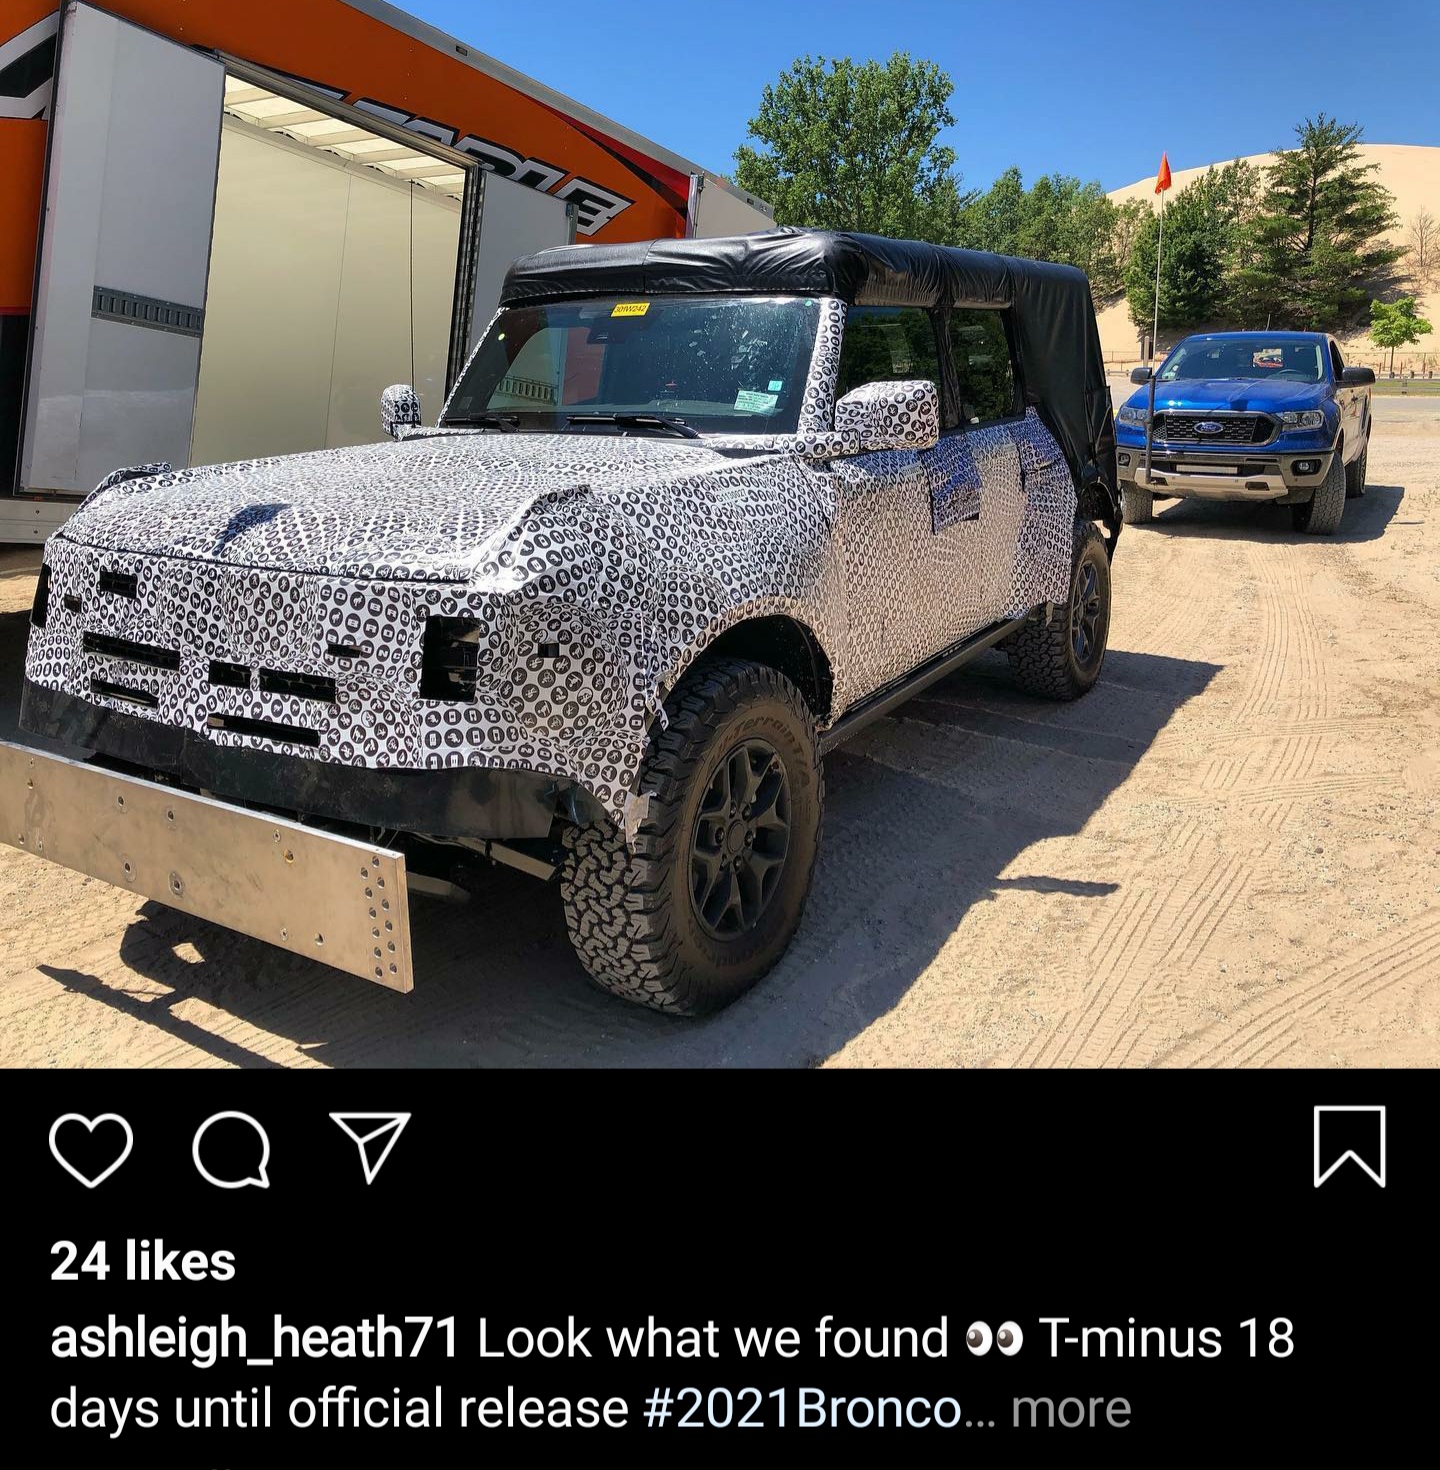 Ford Bronco Bronco Mule Spotted Testing Off-Road Wearing BFG K02 Tires and Mad Max Bumper 20200625_125529